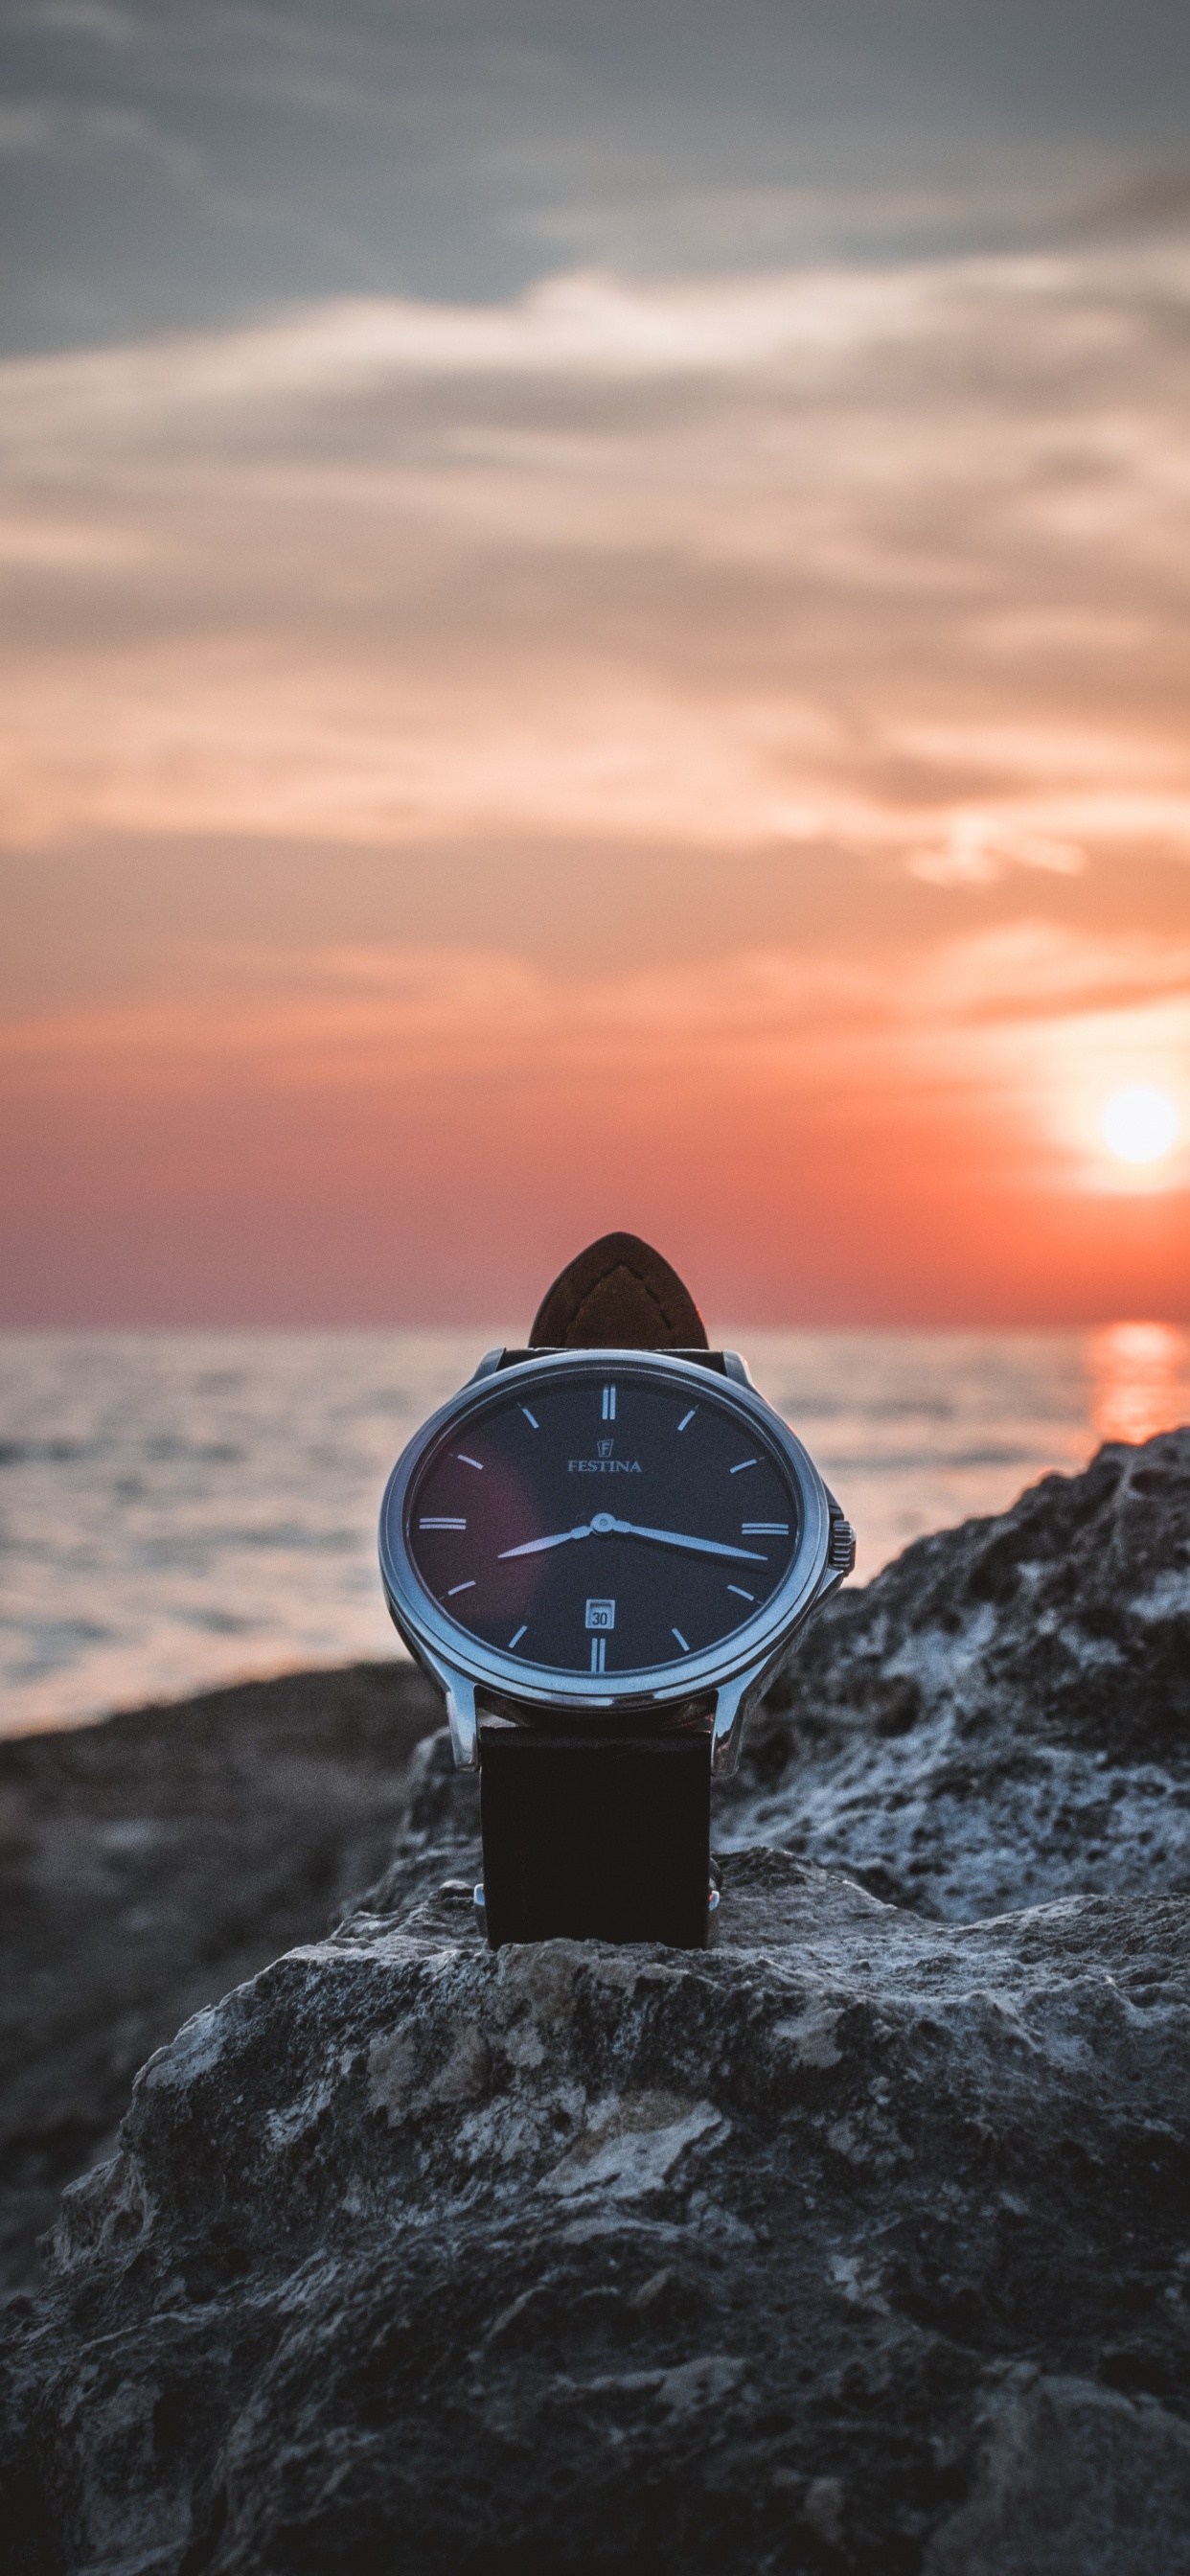 Black and White Analog Watch on Gray Rock Near Sea During Sunset. Wallpaper in 1242x2688 Resolution